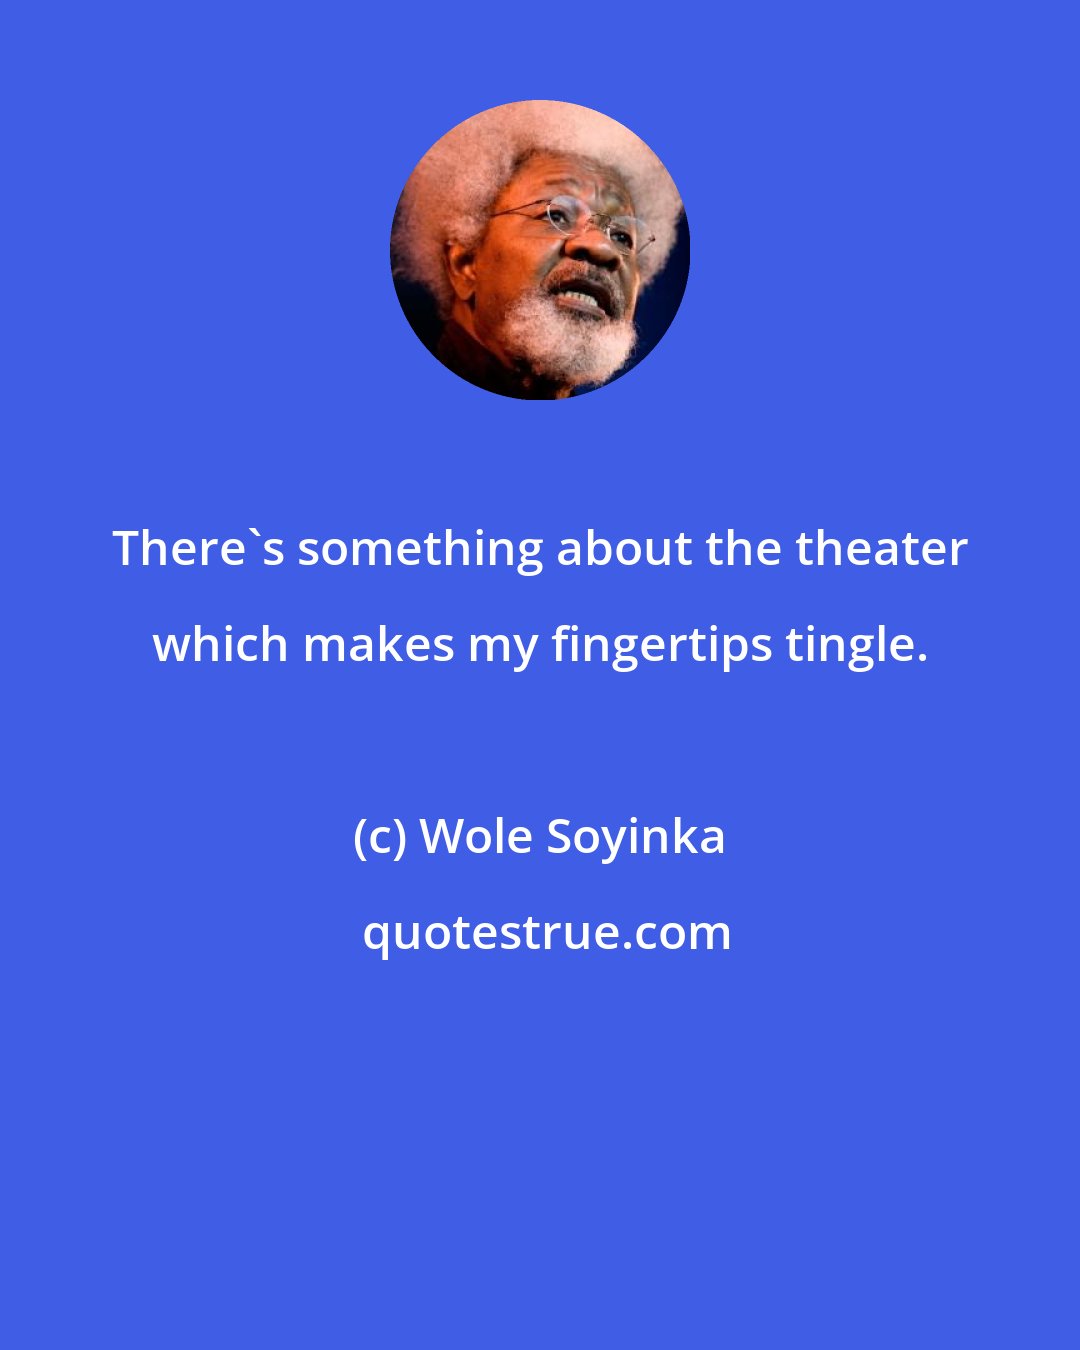 Wole Soyinka: There's something about the theater which makes my fingertips tingle.